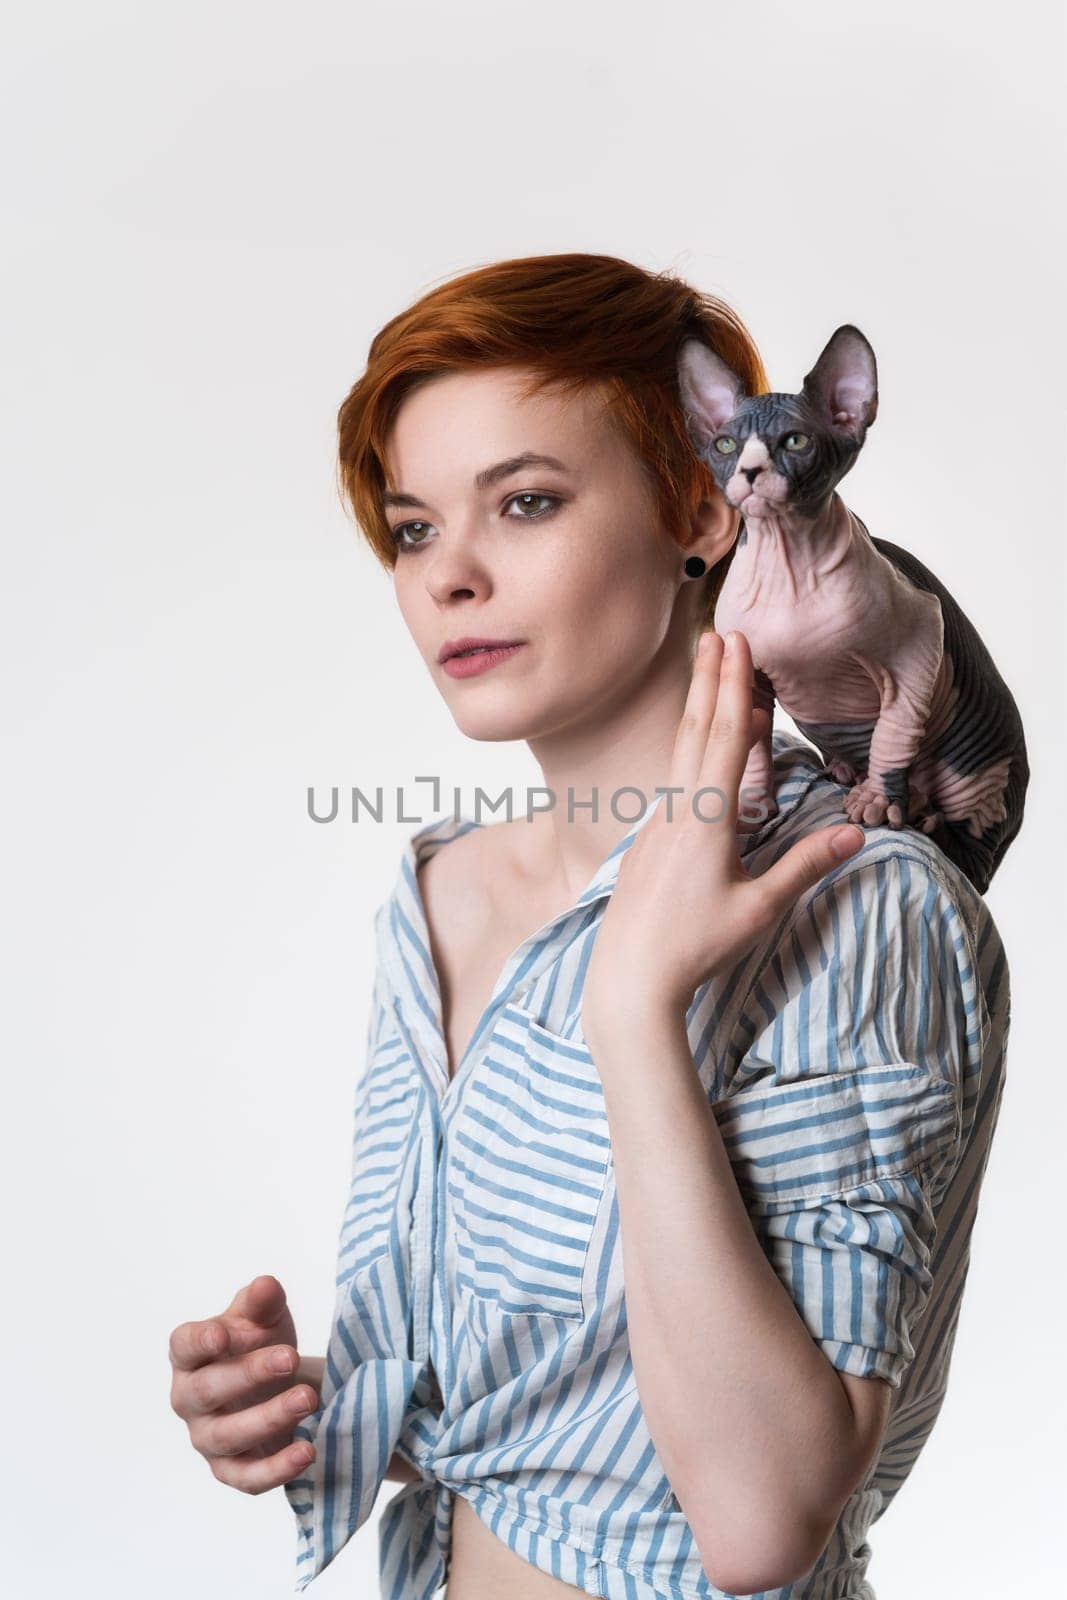 Sphynx Hairless Cat sitting on shoulder of redhead young woman. Hipster female with short hair dressed in striped white-blue shirt. Studio shot on white background. Part of series. Selective focus